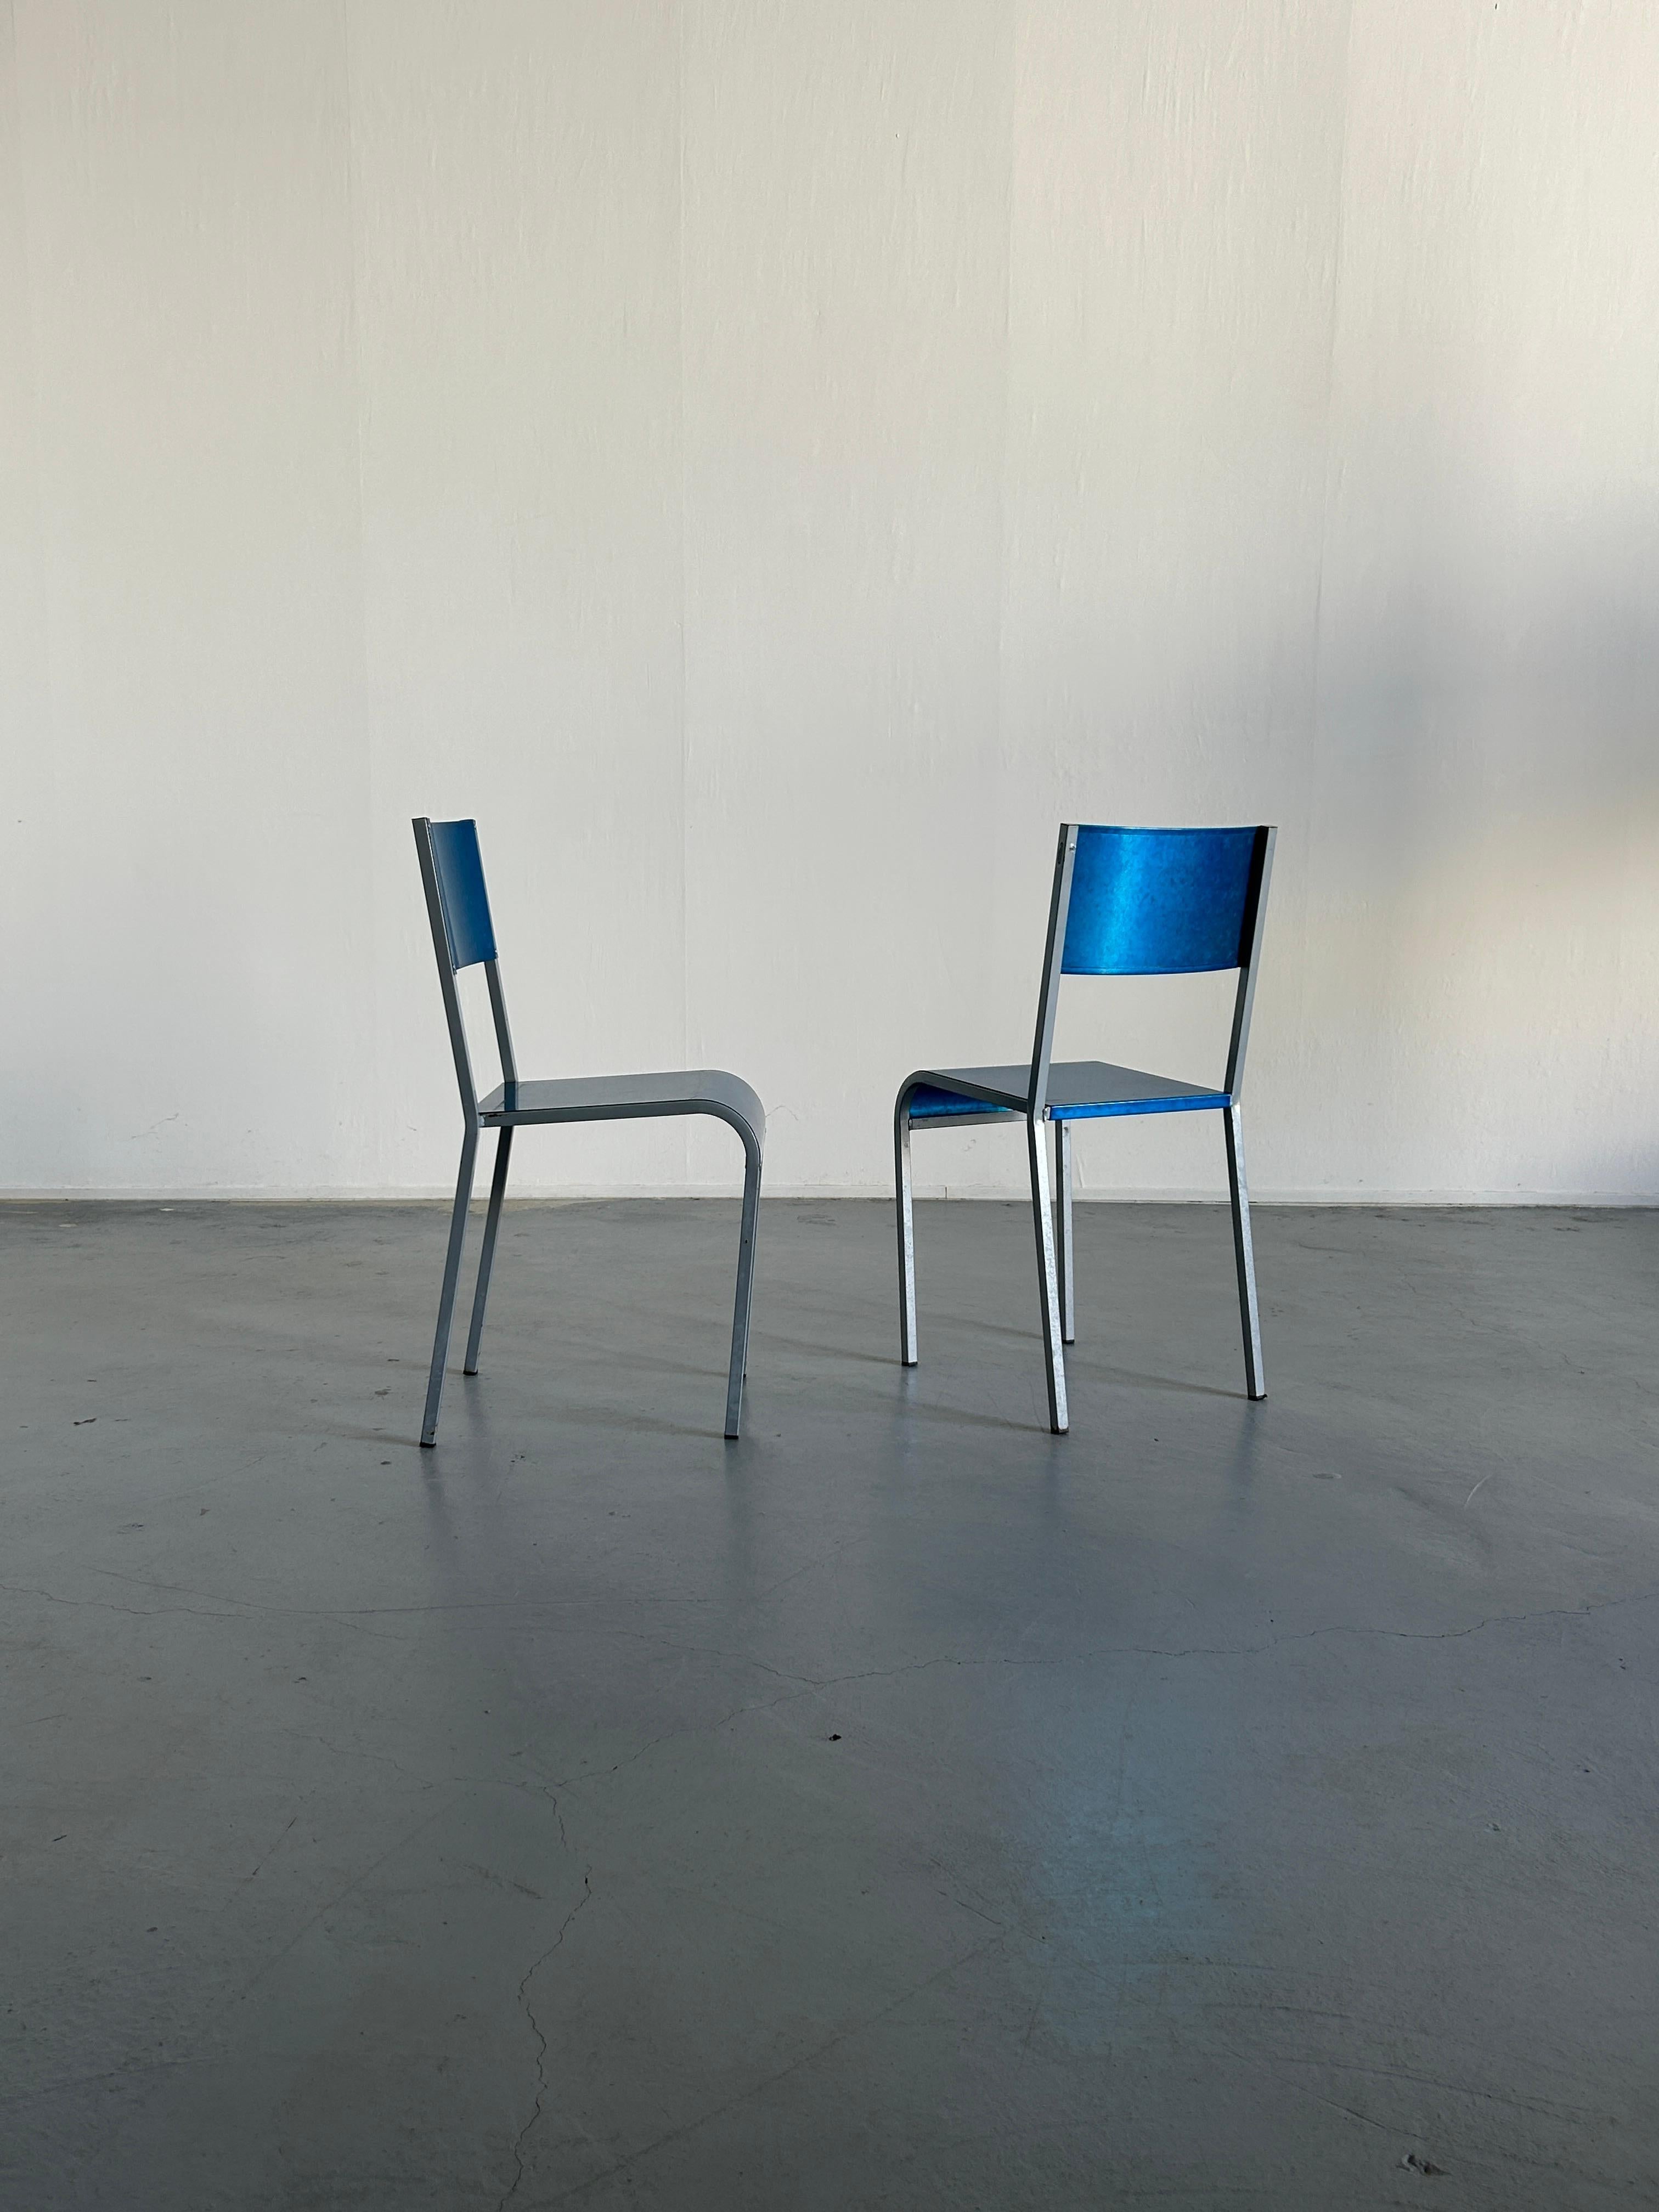 Late 20th Century Pair of Blue Postmodern Industrial Metal Dining Chairs by Parisotto, 1980s Italy For Sale